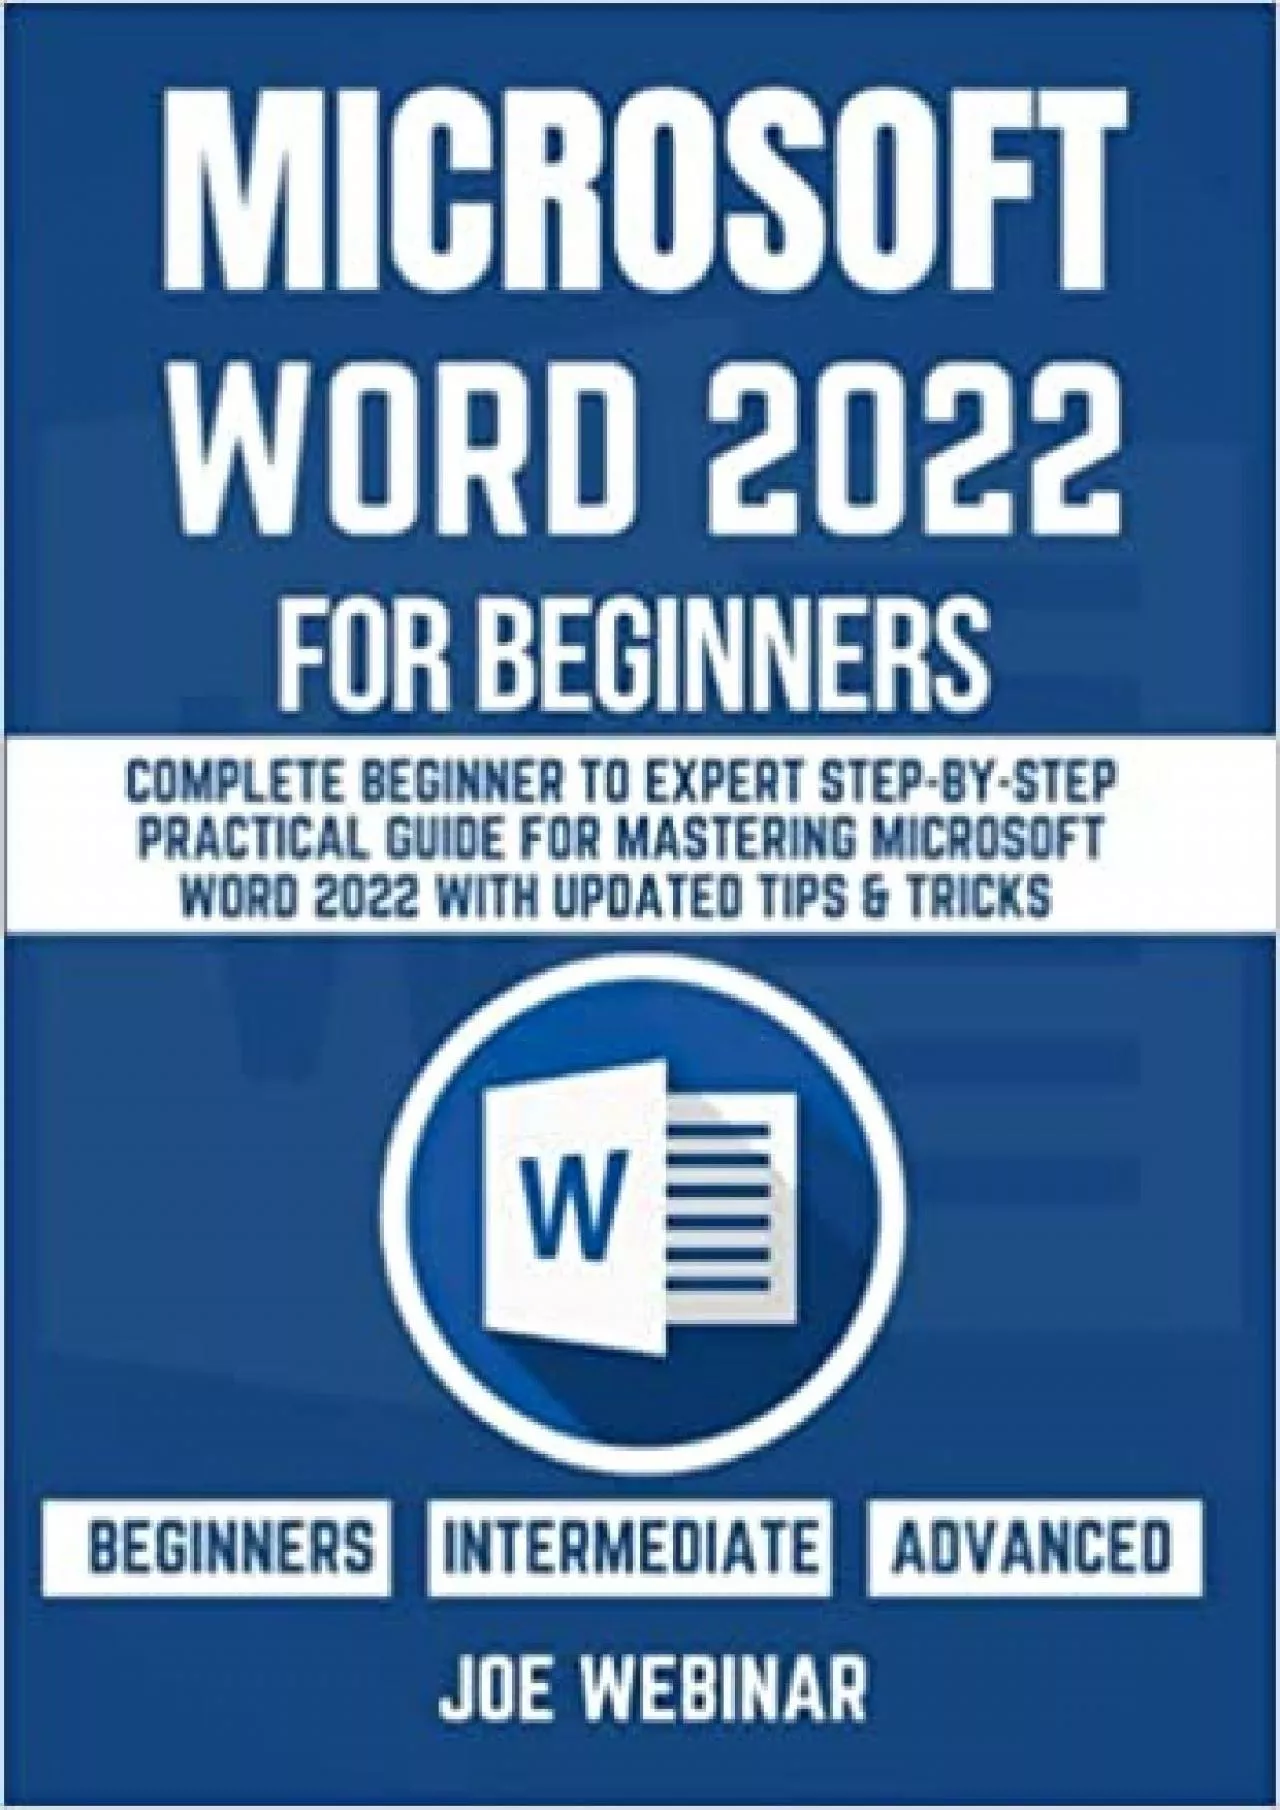 MICROSOFT WORD 2022 FOR BEGINNERS: COMPLETE BEGINNER TO EXPERT STEP-BY-STEP PRACTICAL